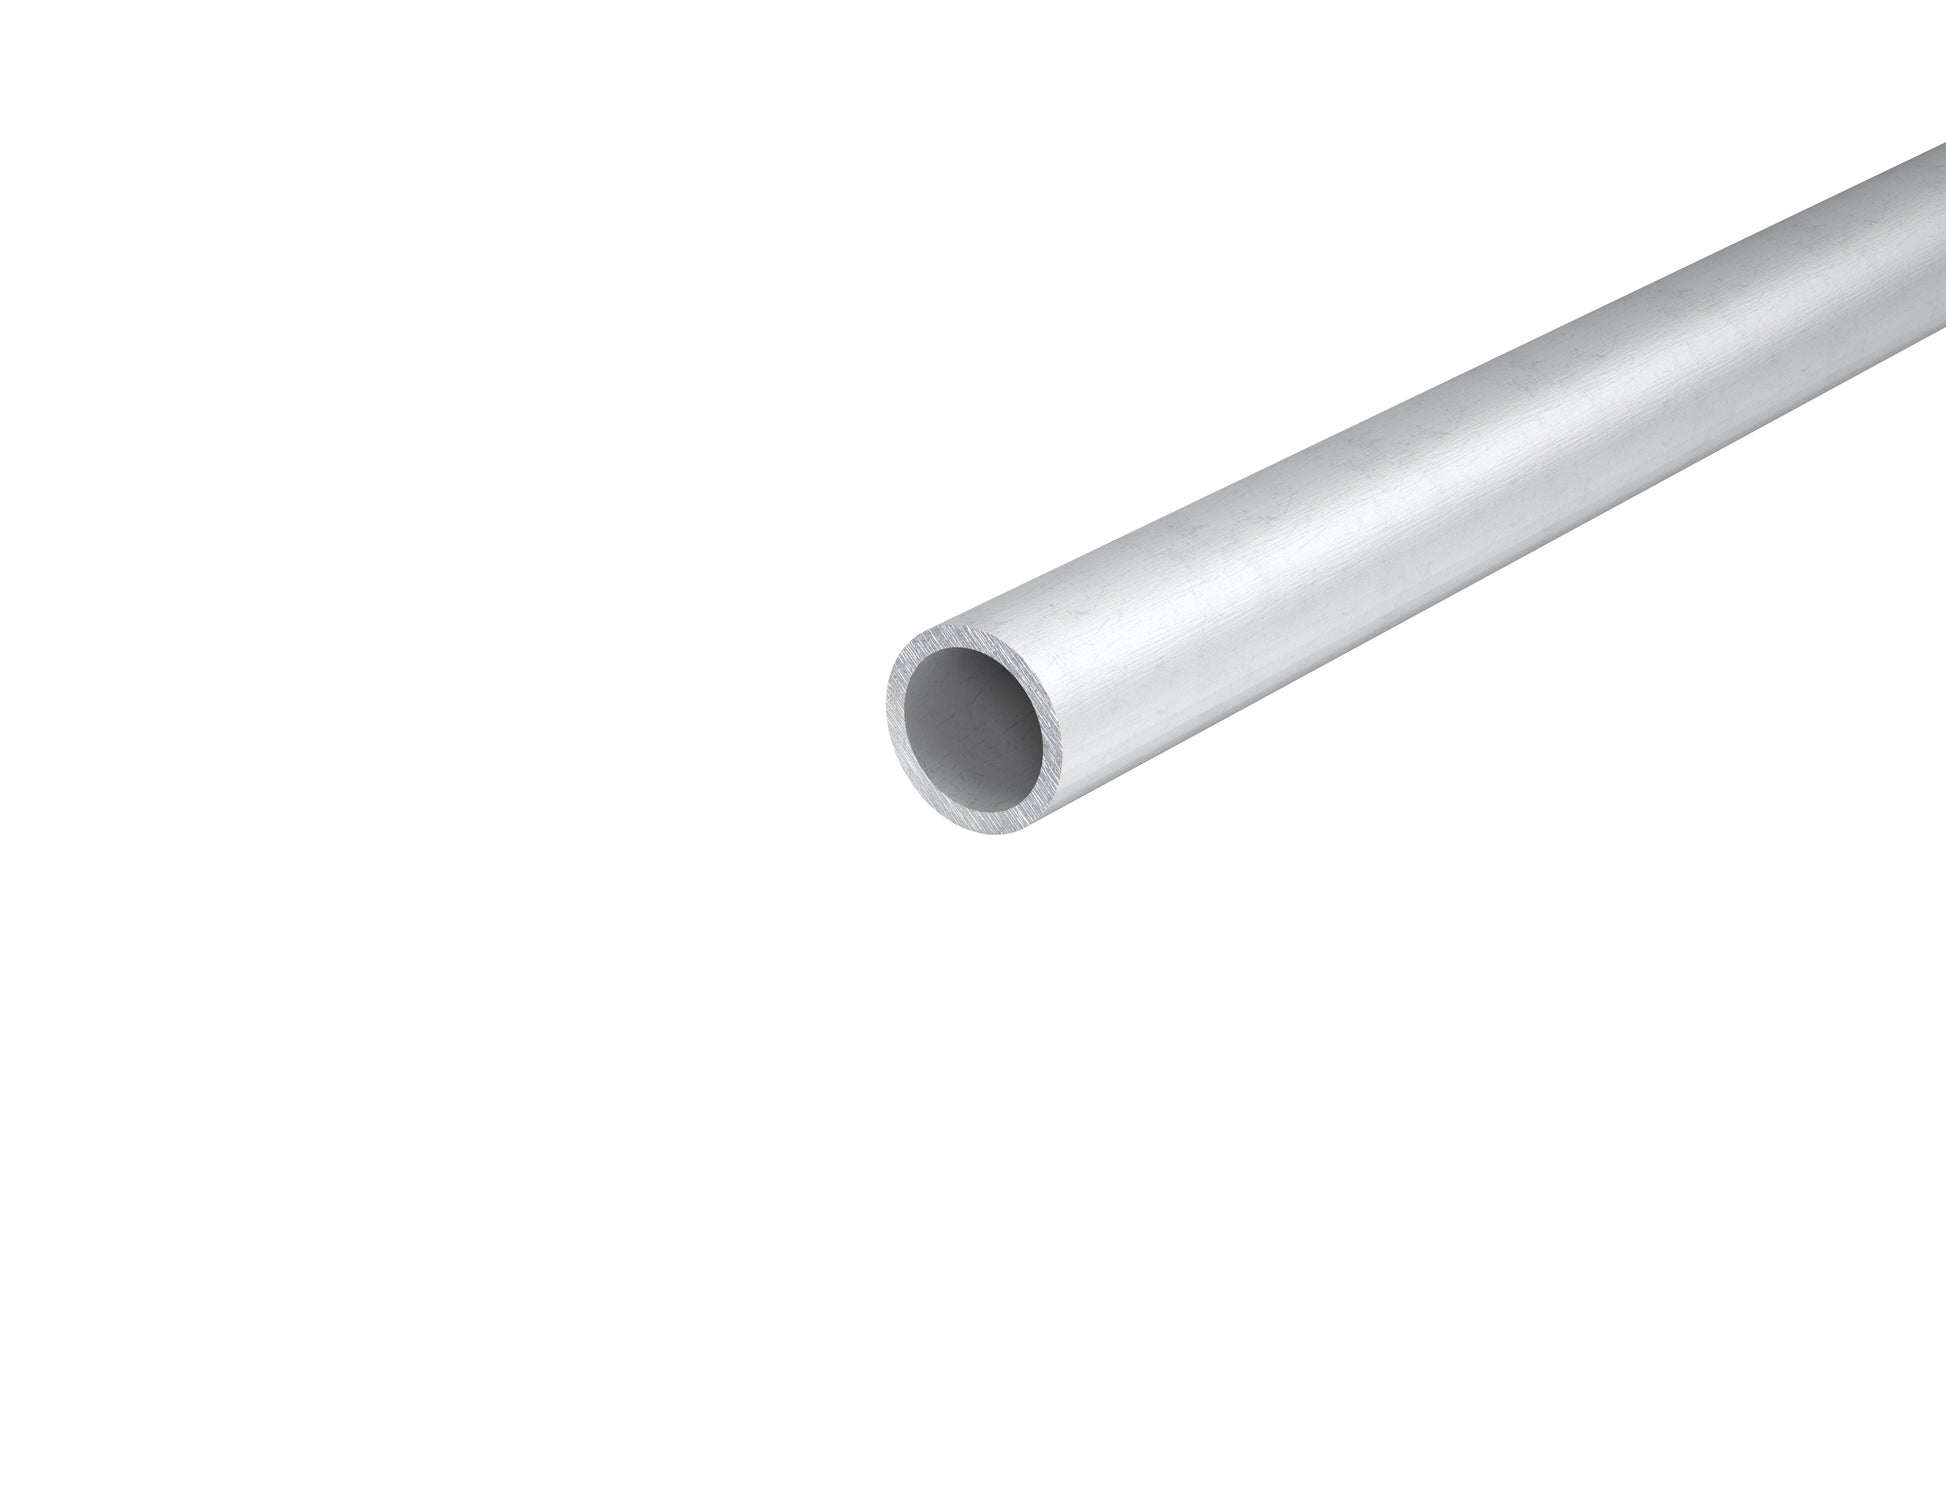 1.272" OD x 0.136" Wall Extruded Round Aluminum Tube 6063-T5 Approximately 1-1/4" OD x 1/8" wall